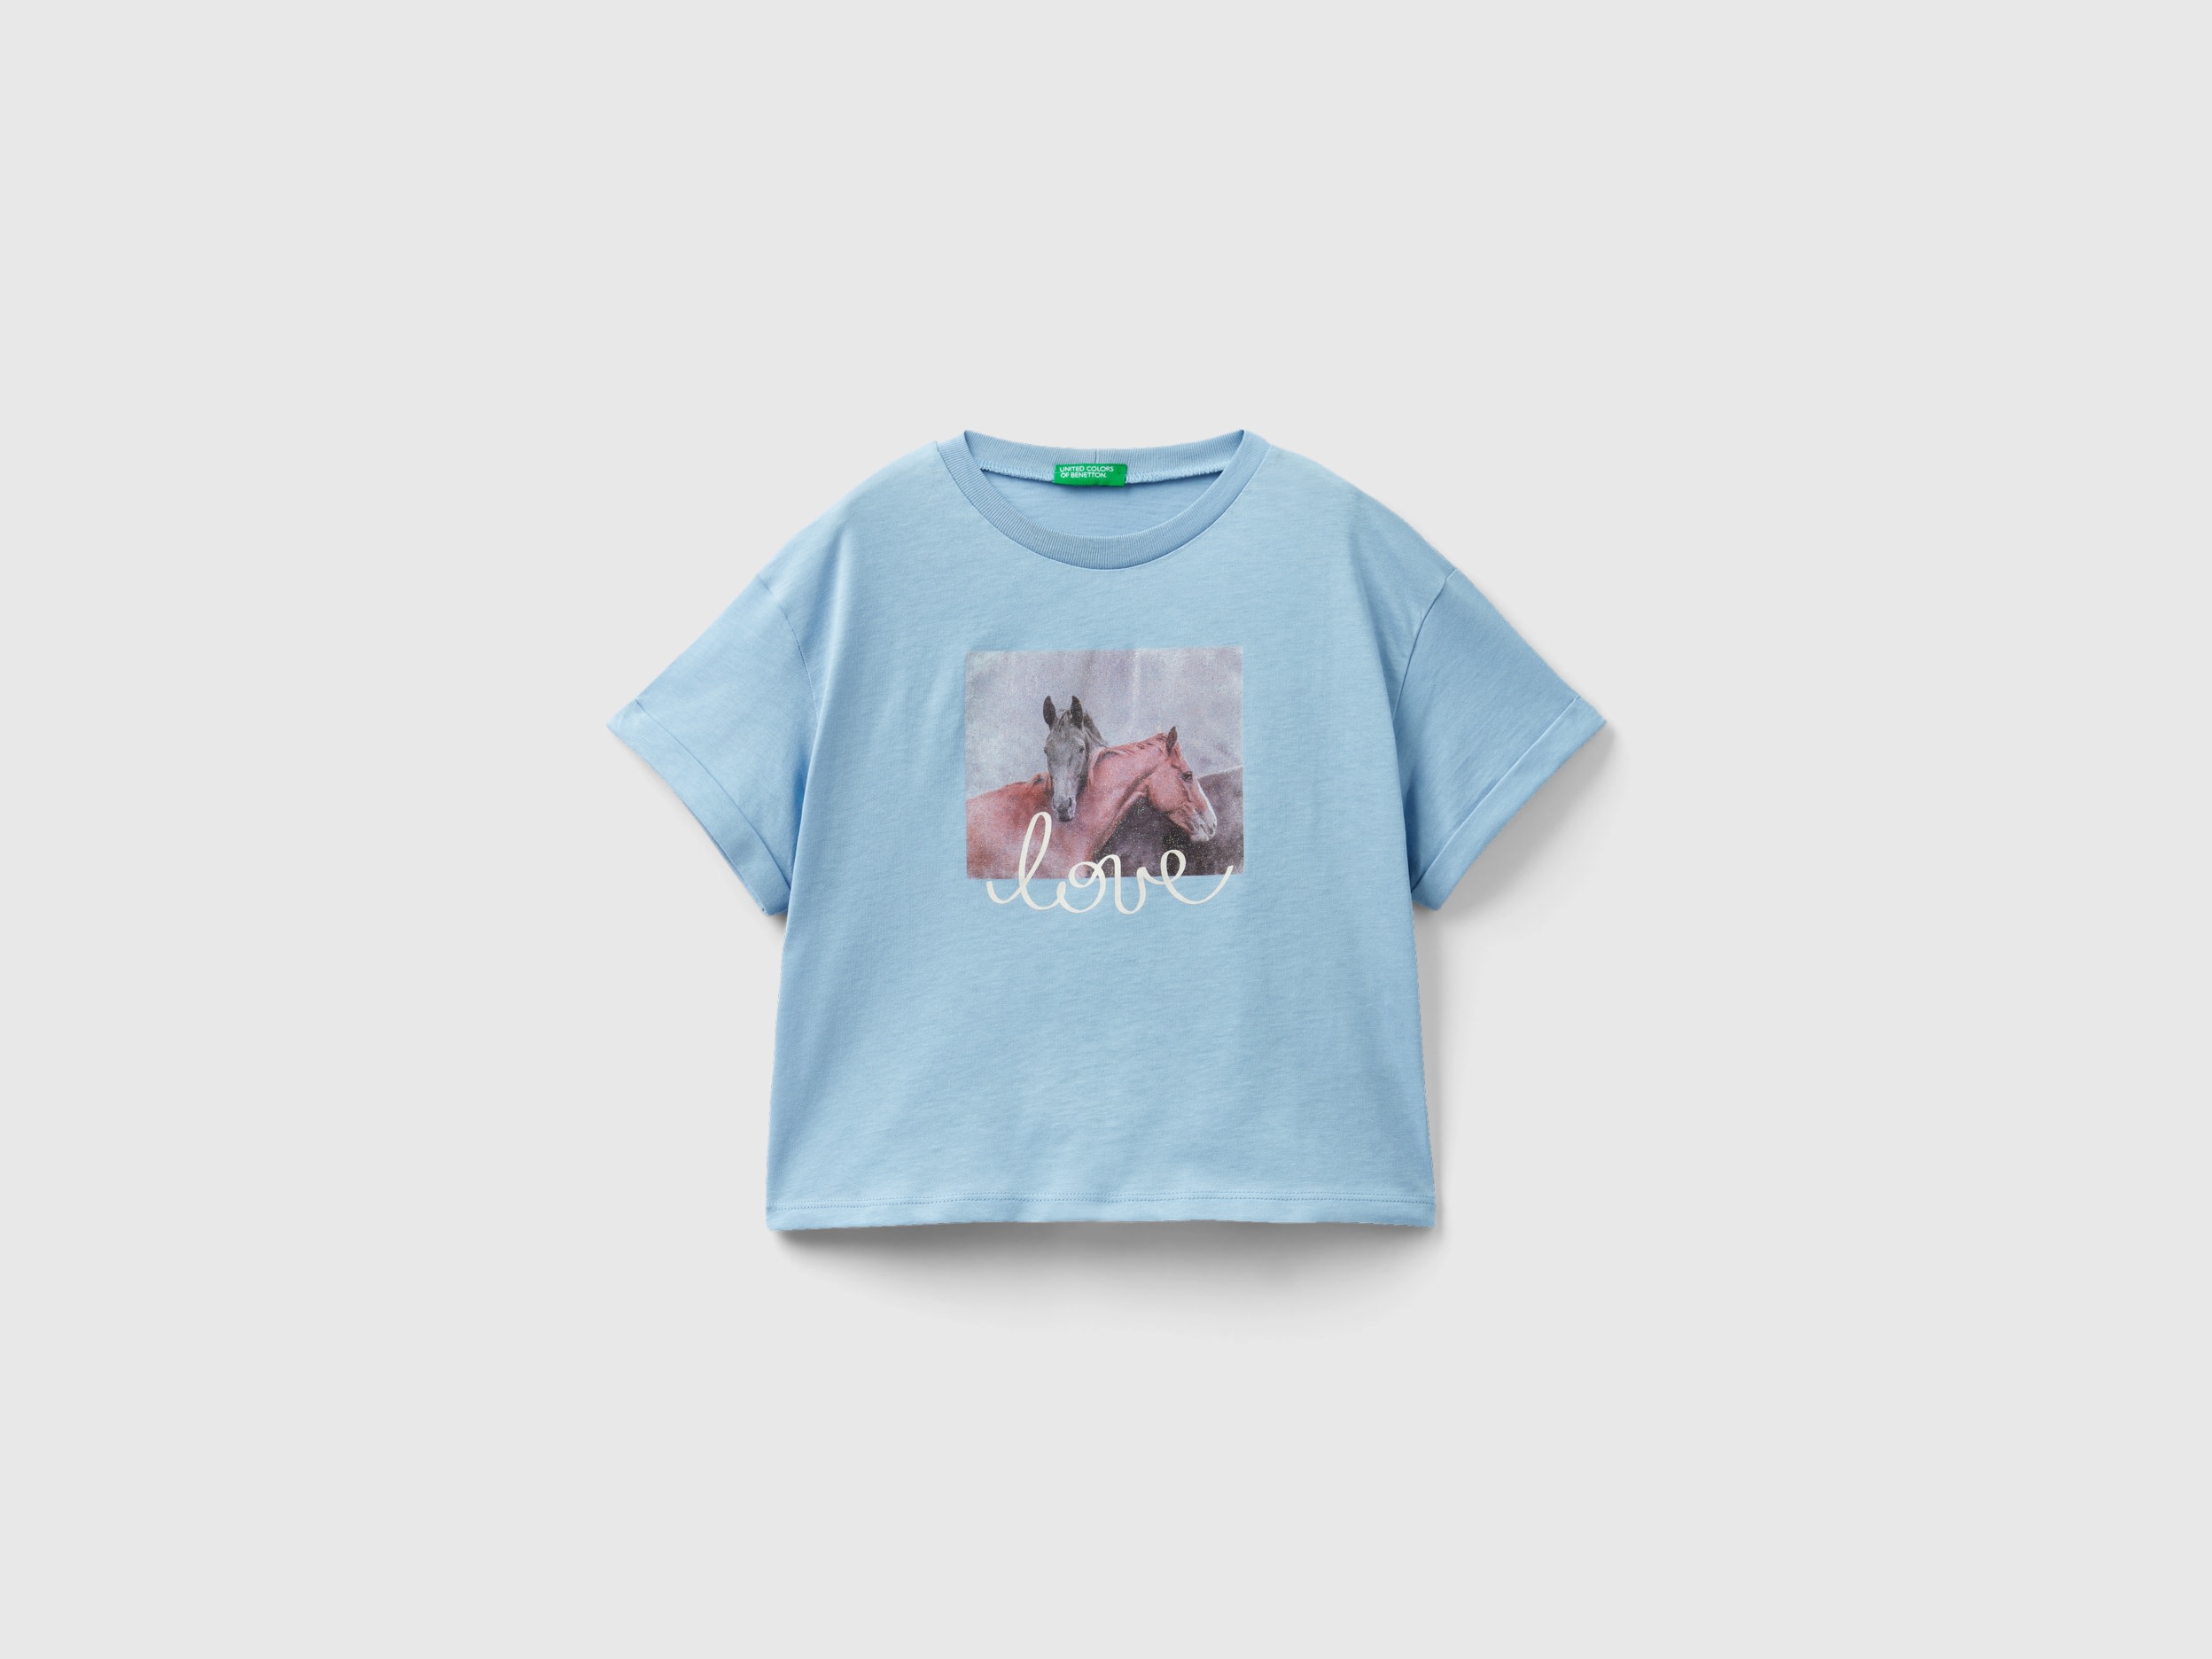 Image of Benetton, T-shirt With Photographic Horse Print, size XL, Sky Blue, Kids